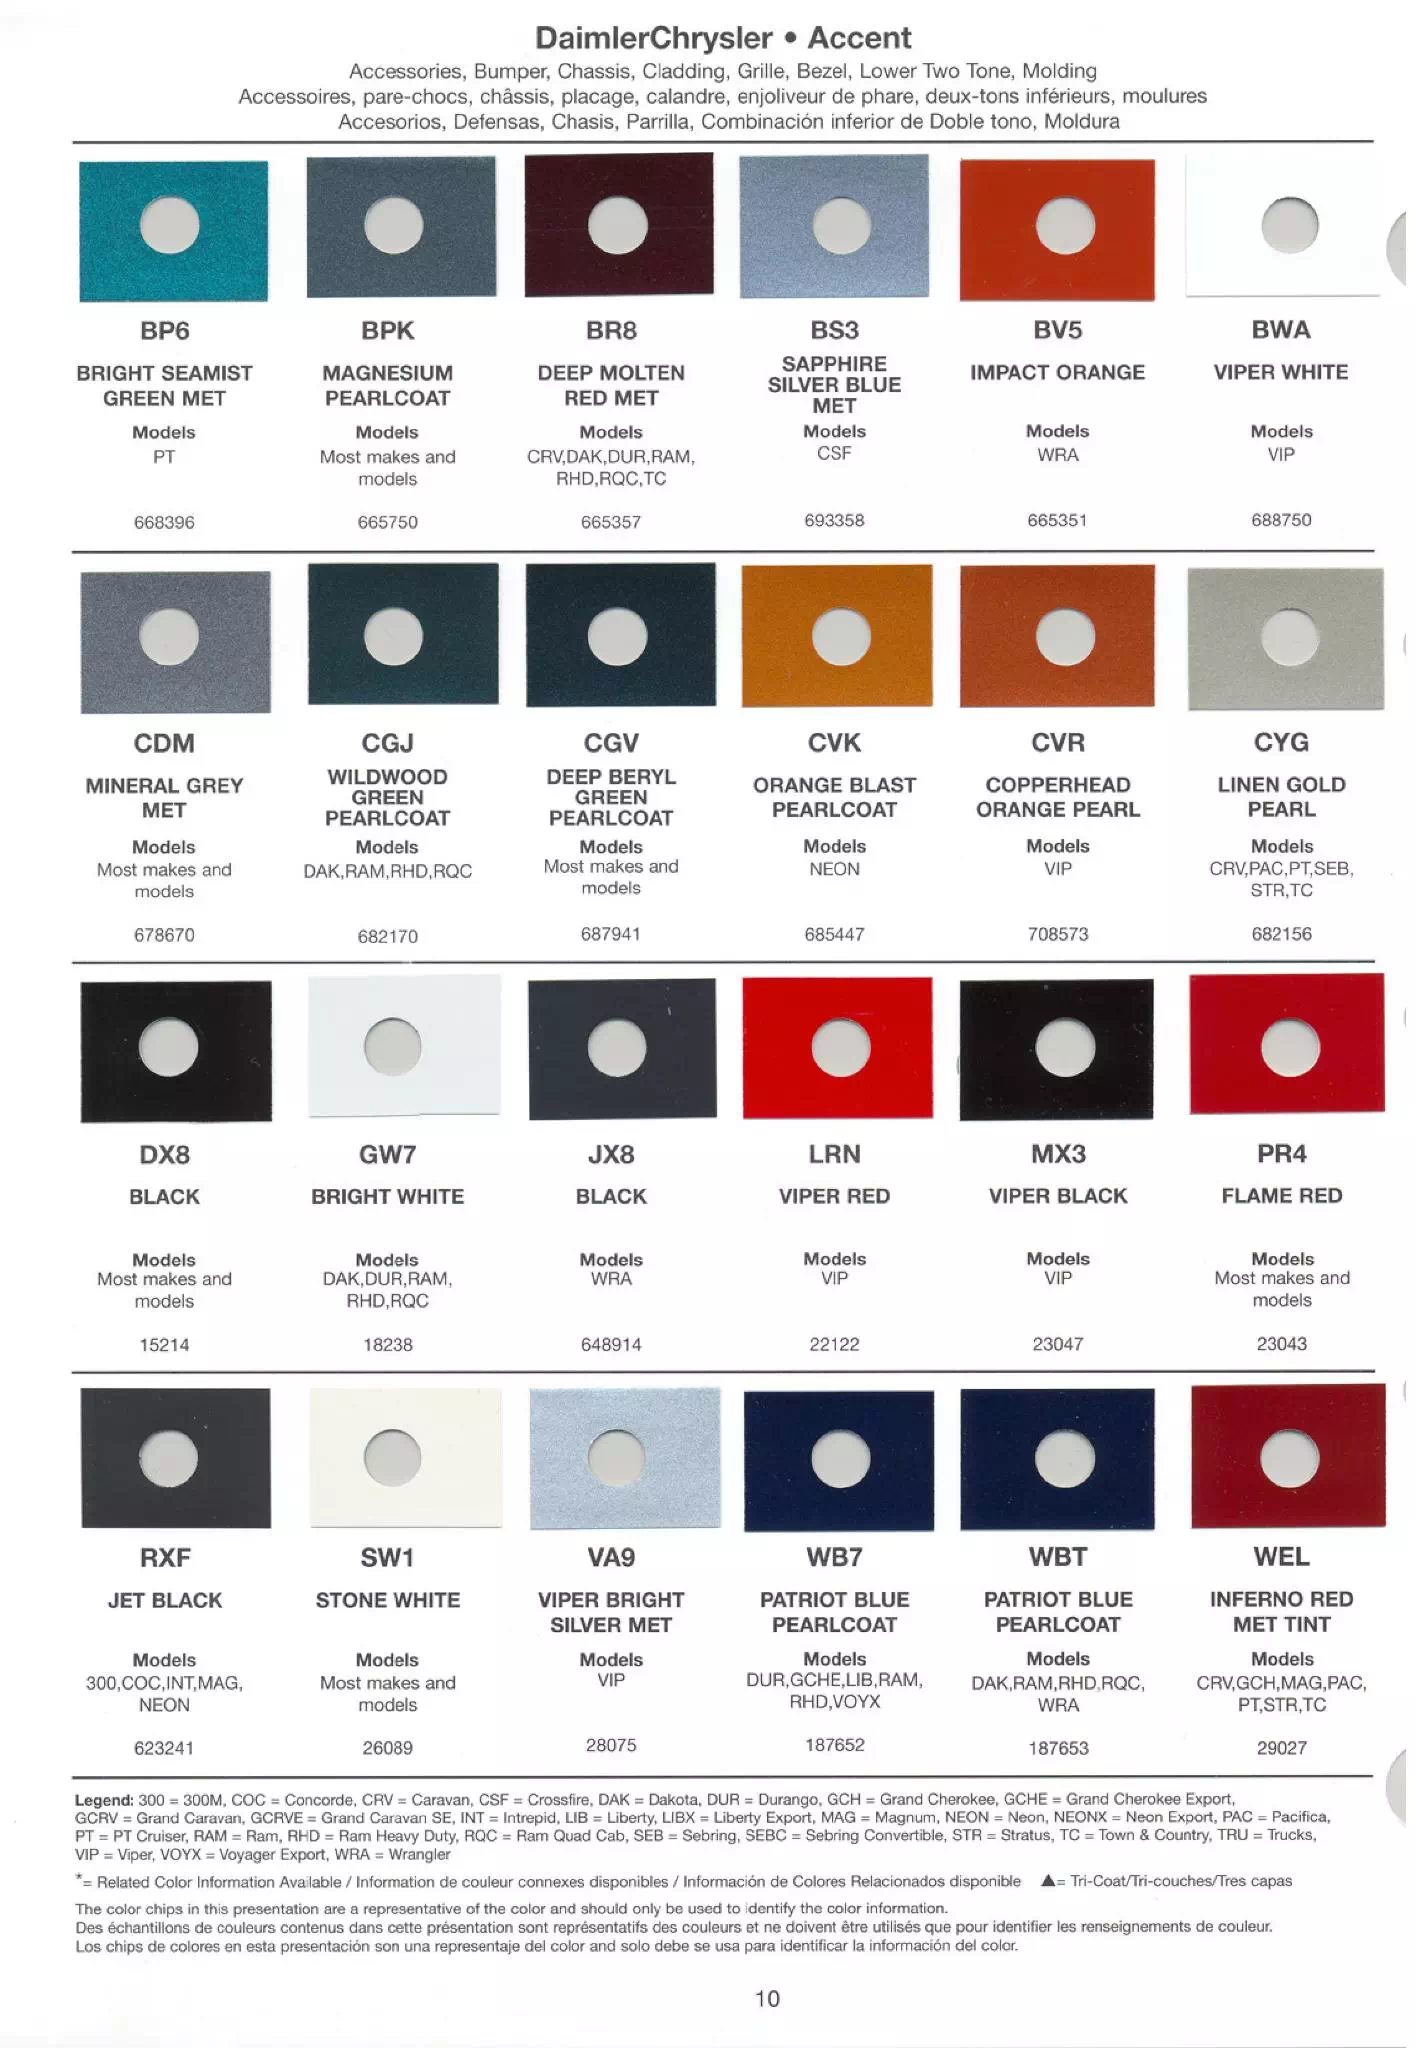 Accent paint codes and swatches